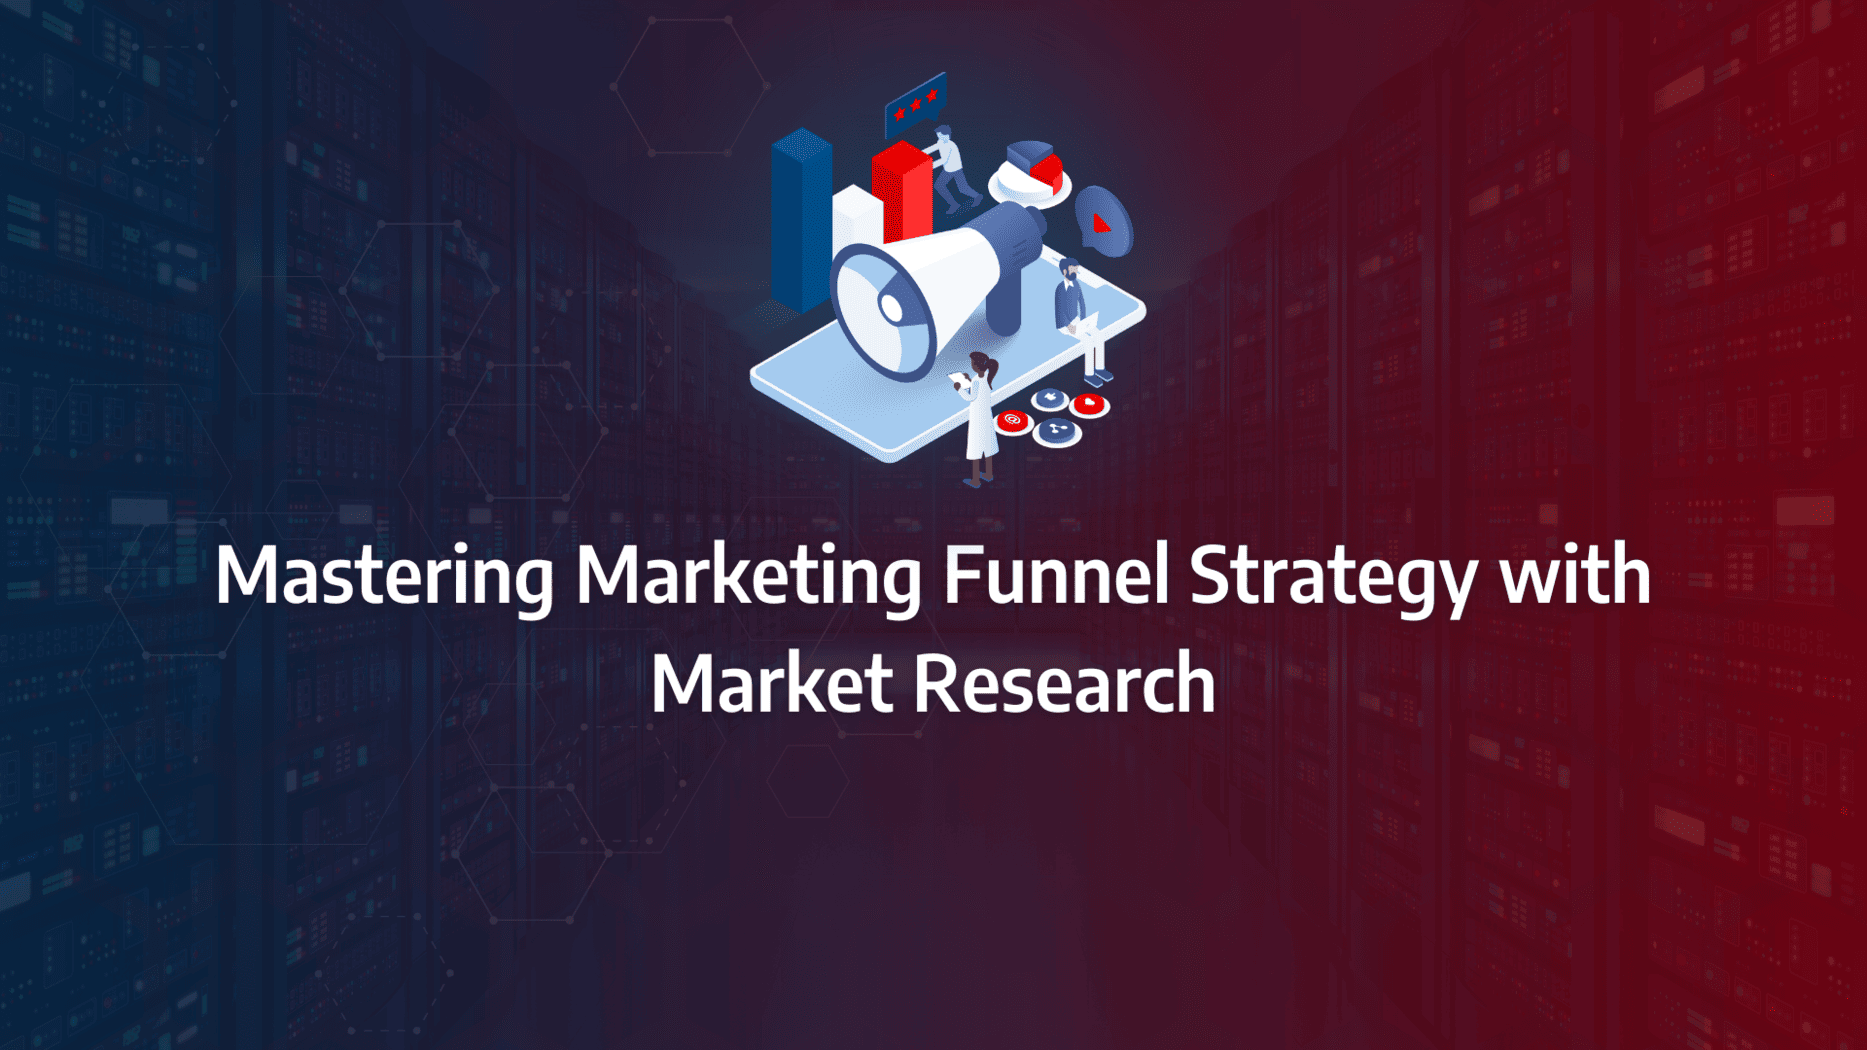 Leveraging Market Research Tactics to Optimise Your Digital Marketing Funnel Performance: strategy framework diagram for marketing funnel strategy, market research tools, how to conduct market research, digital marketing funnel, marketing funnel conversion